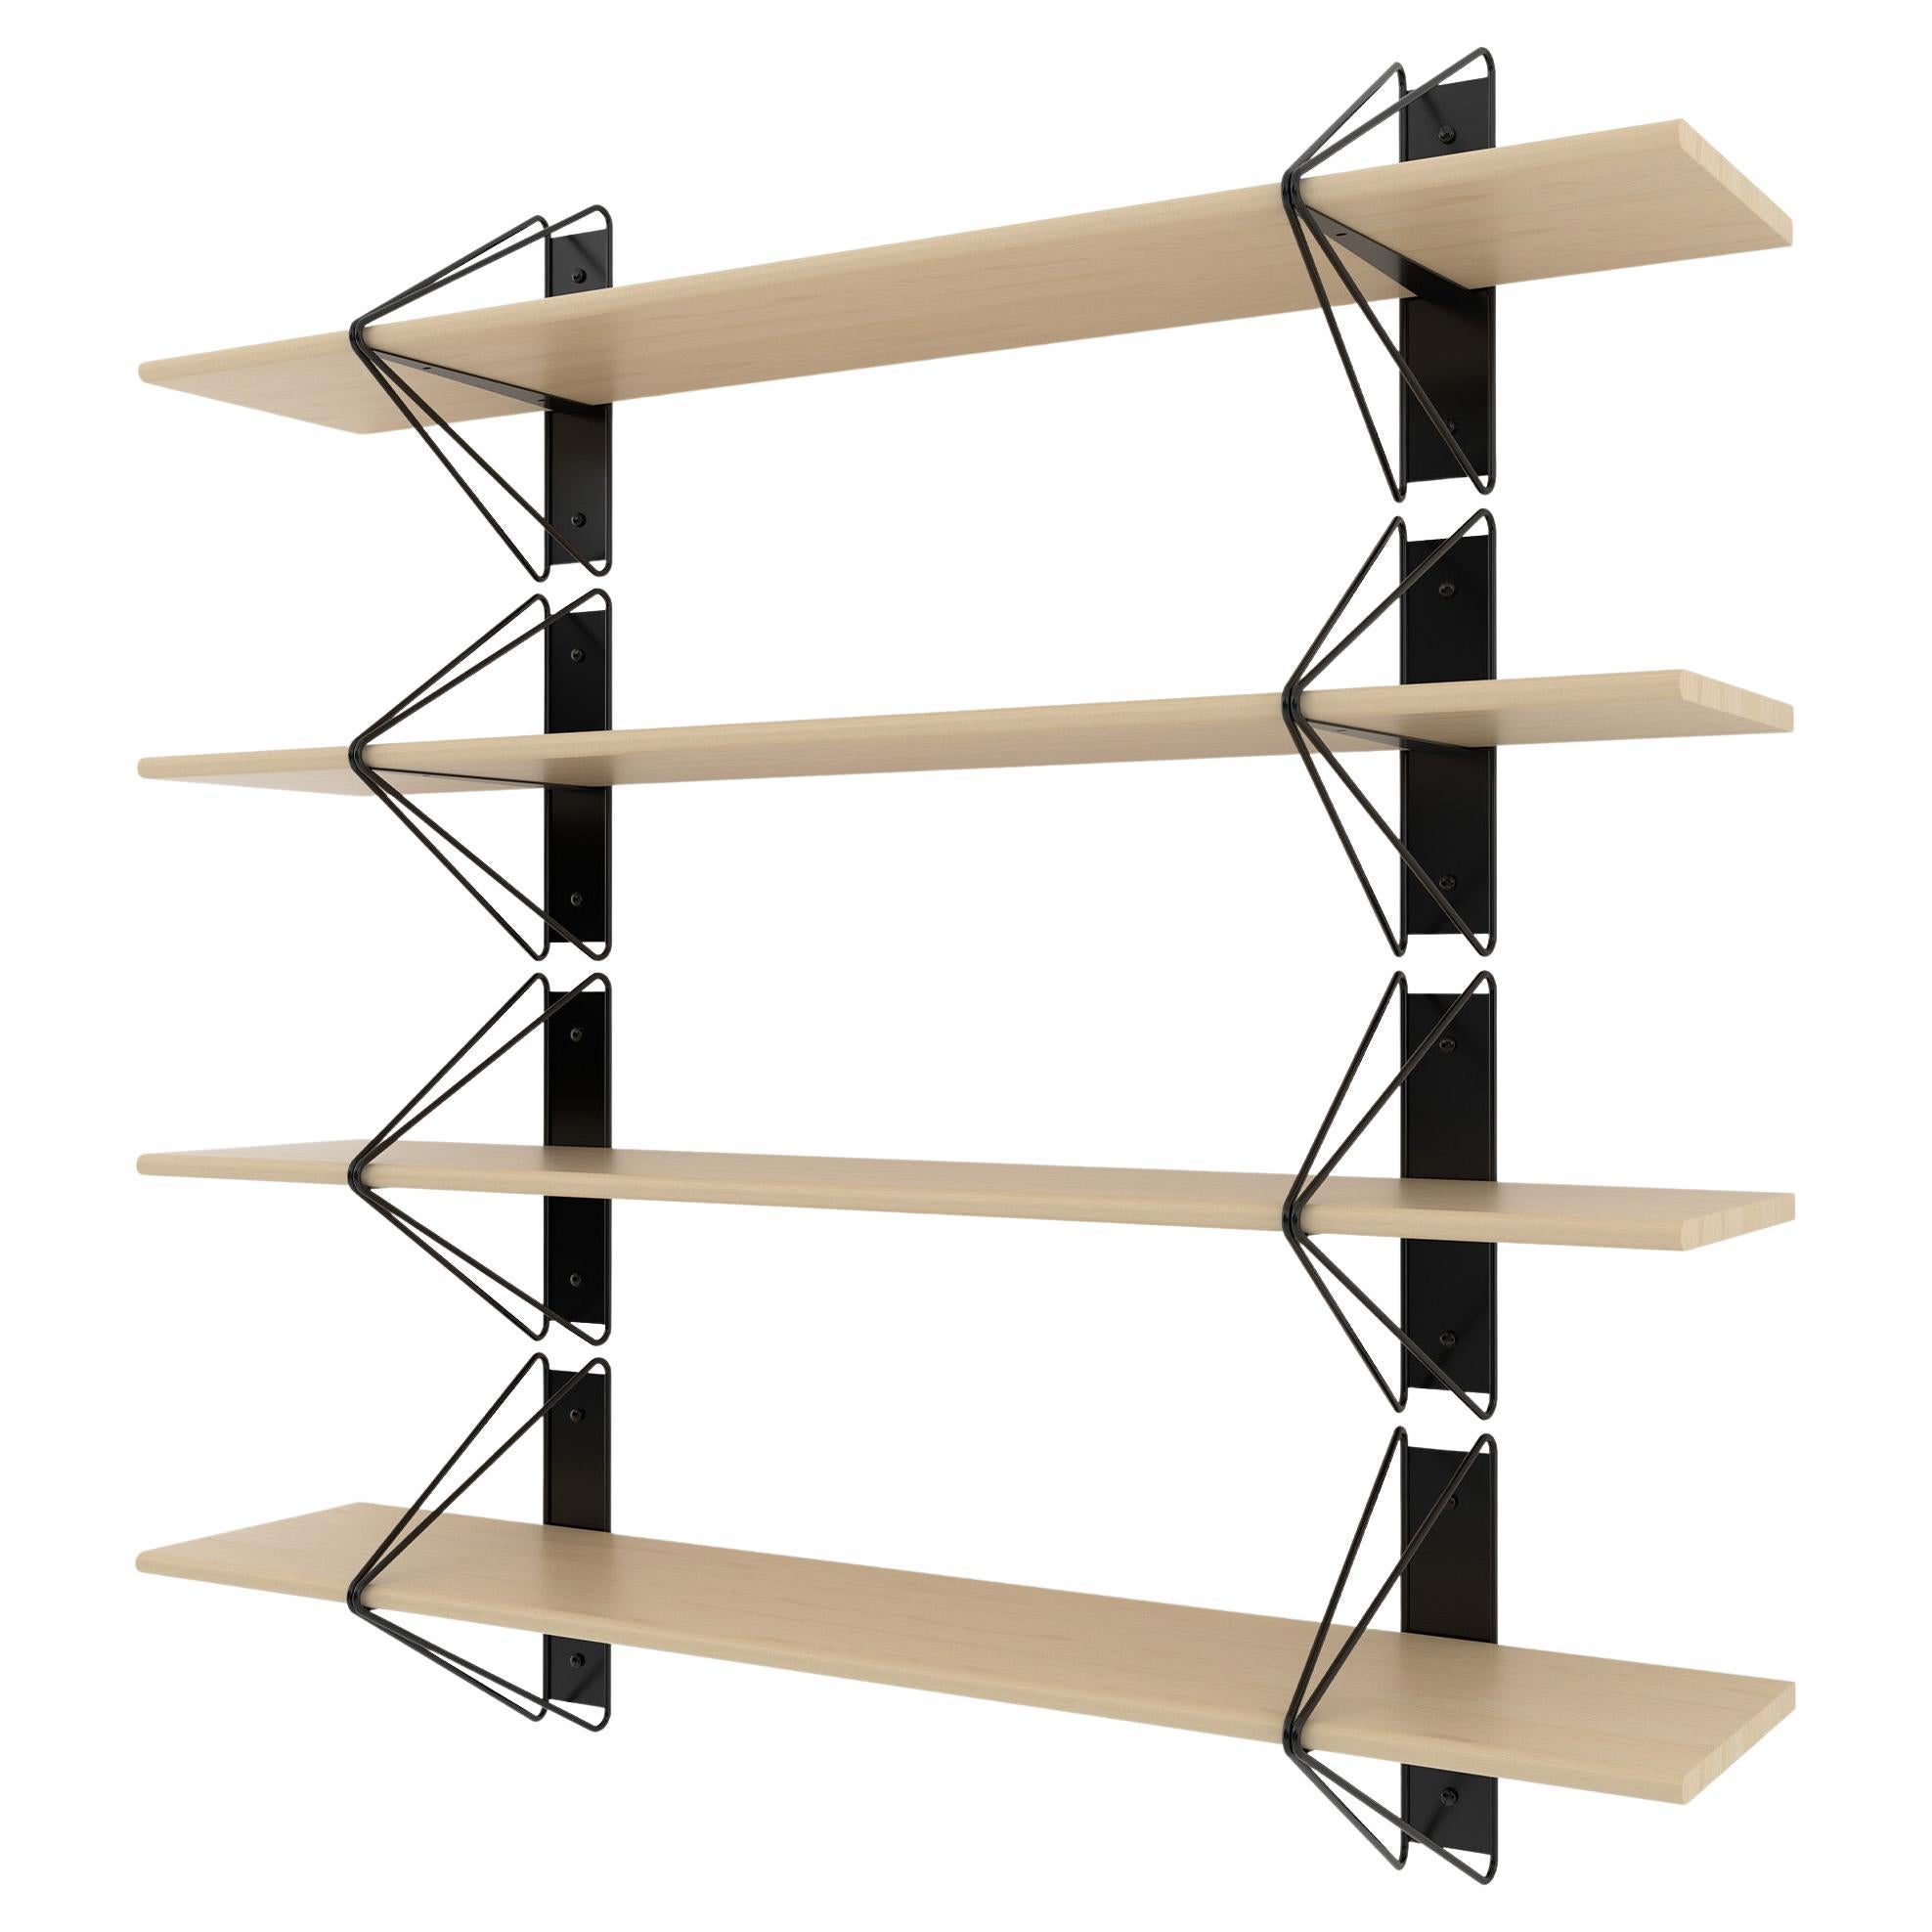 Set of 4 Strut Shelves from Souda, Black and Maple, Made to Order For Sale